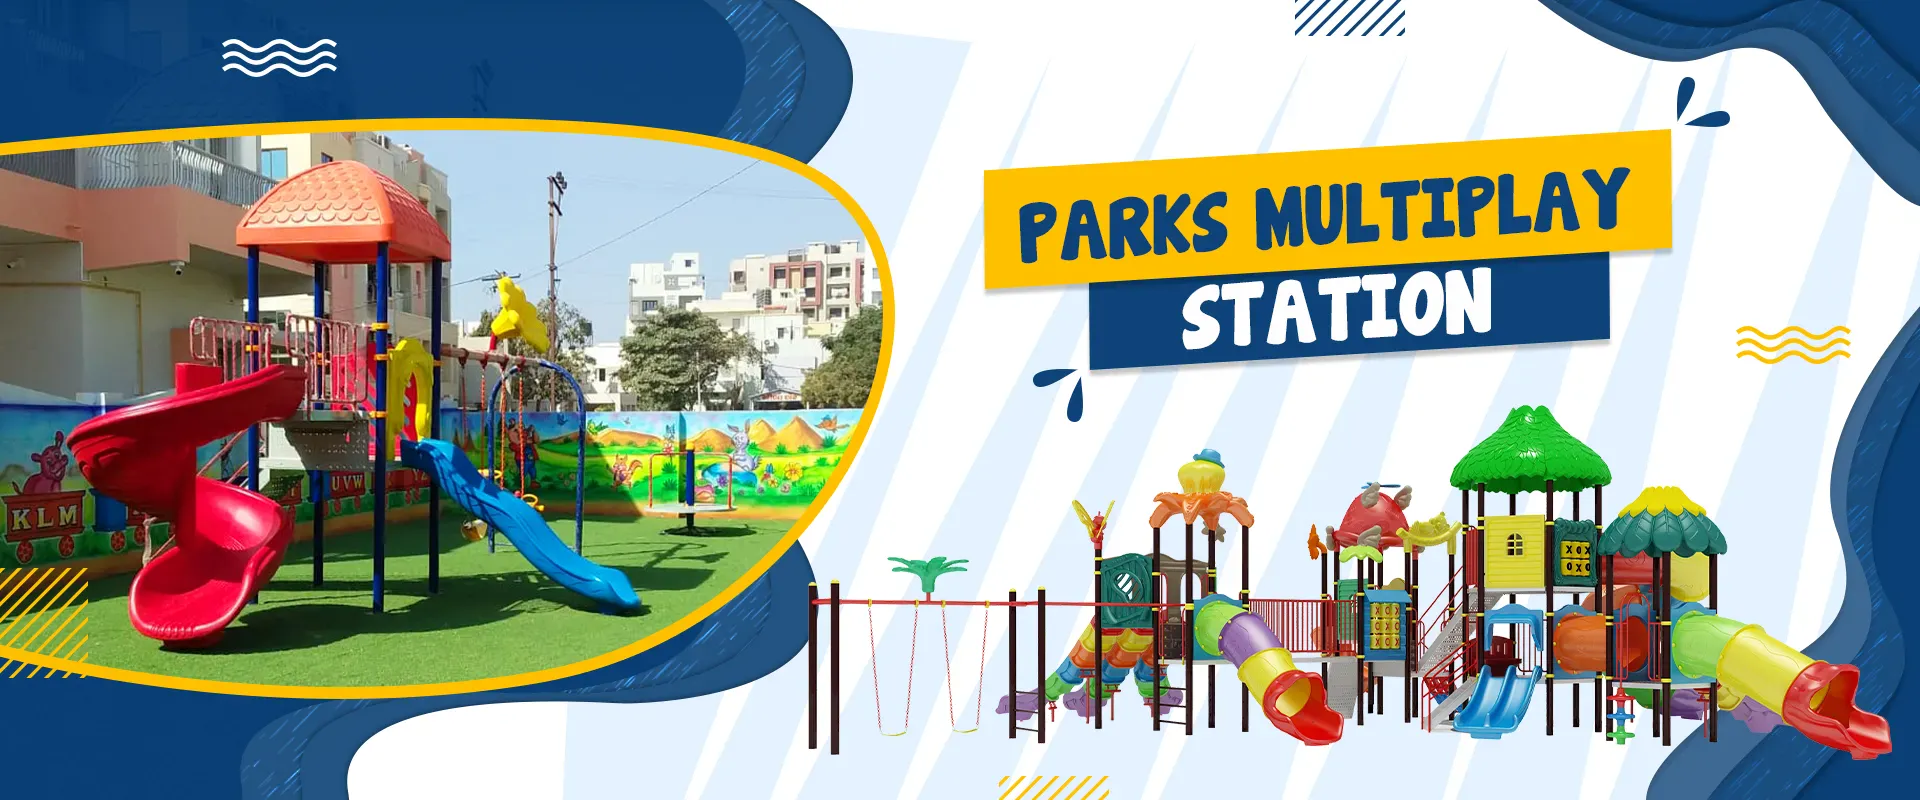 Parks Multiplay Station